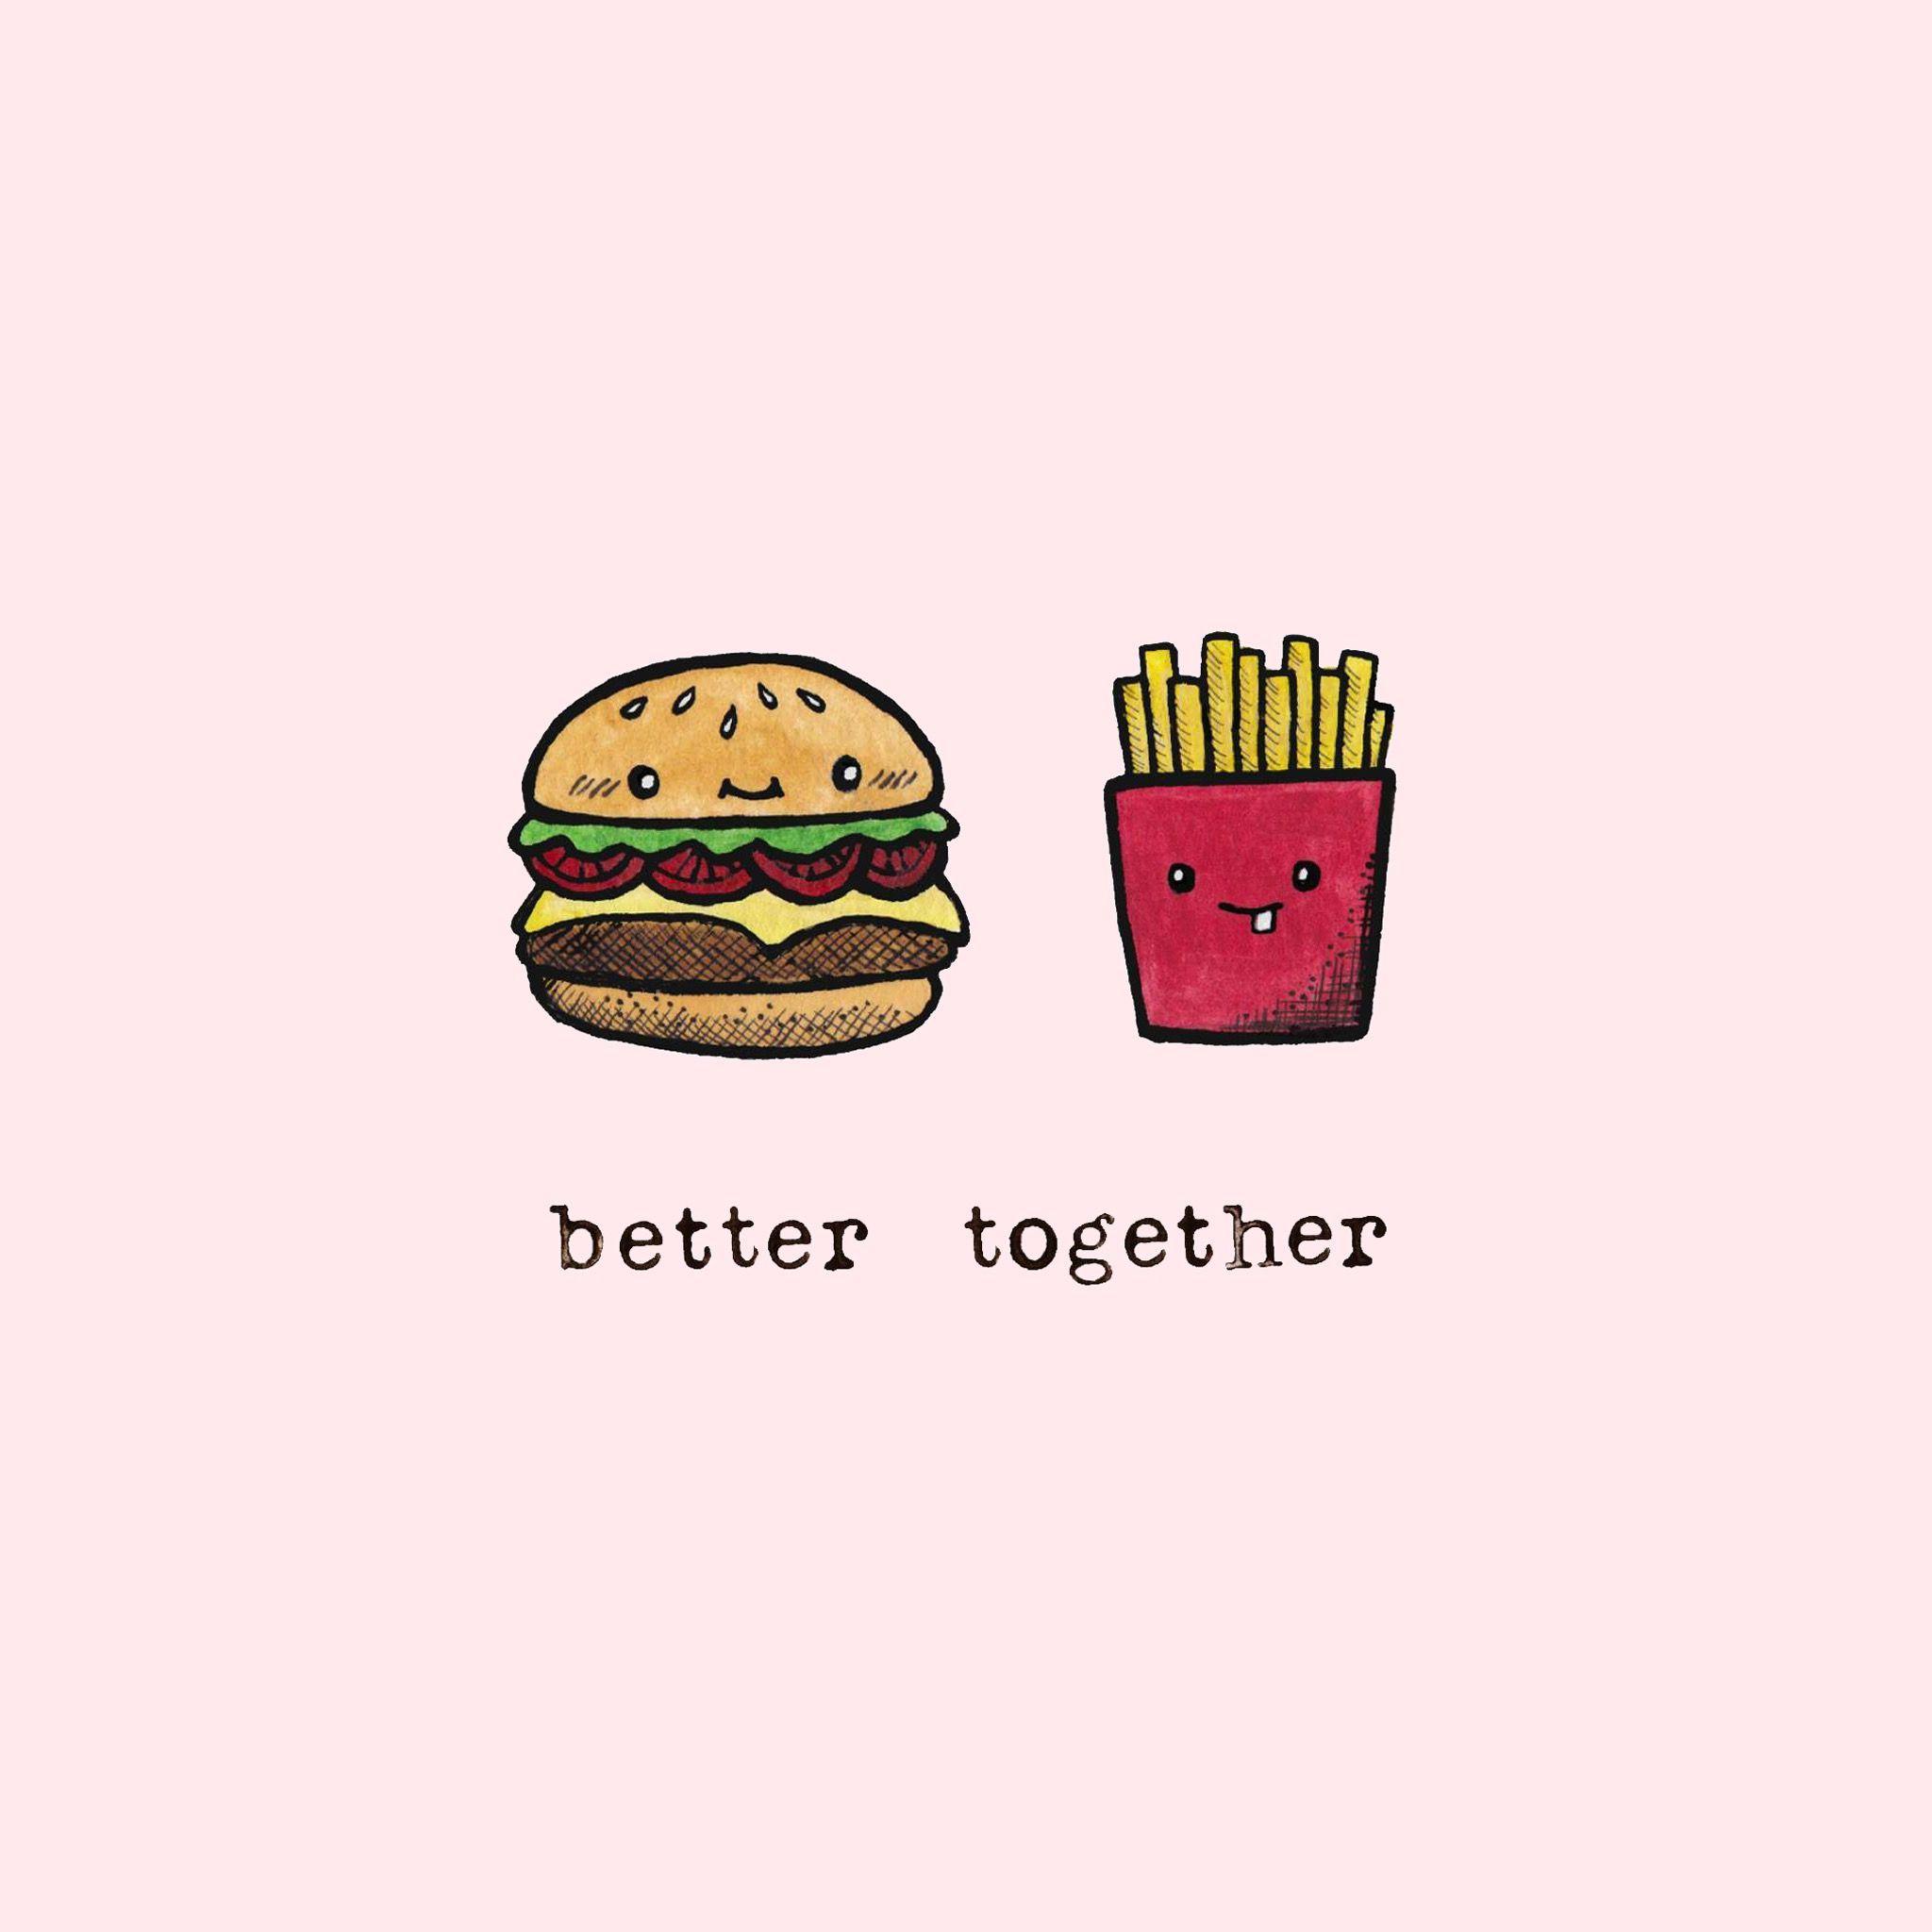 Better together wallpaper. WALPAPERS. Drawings, Cute